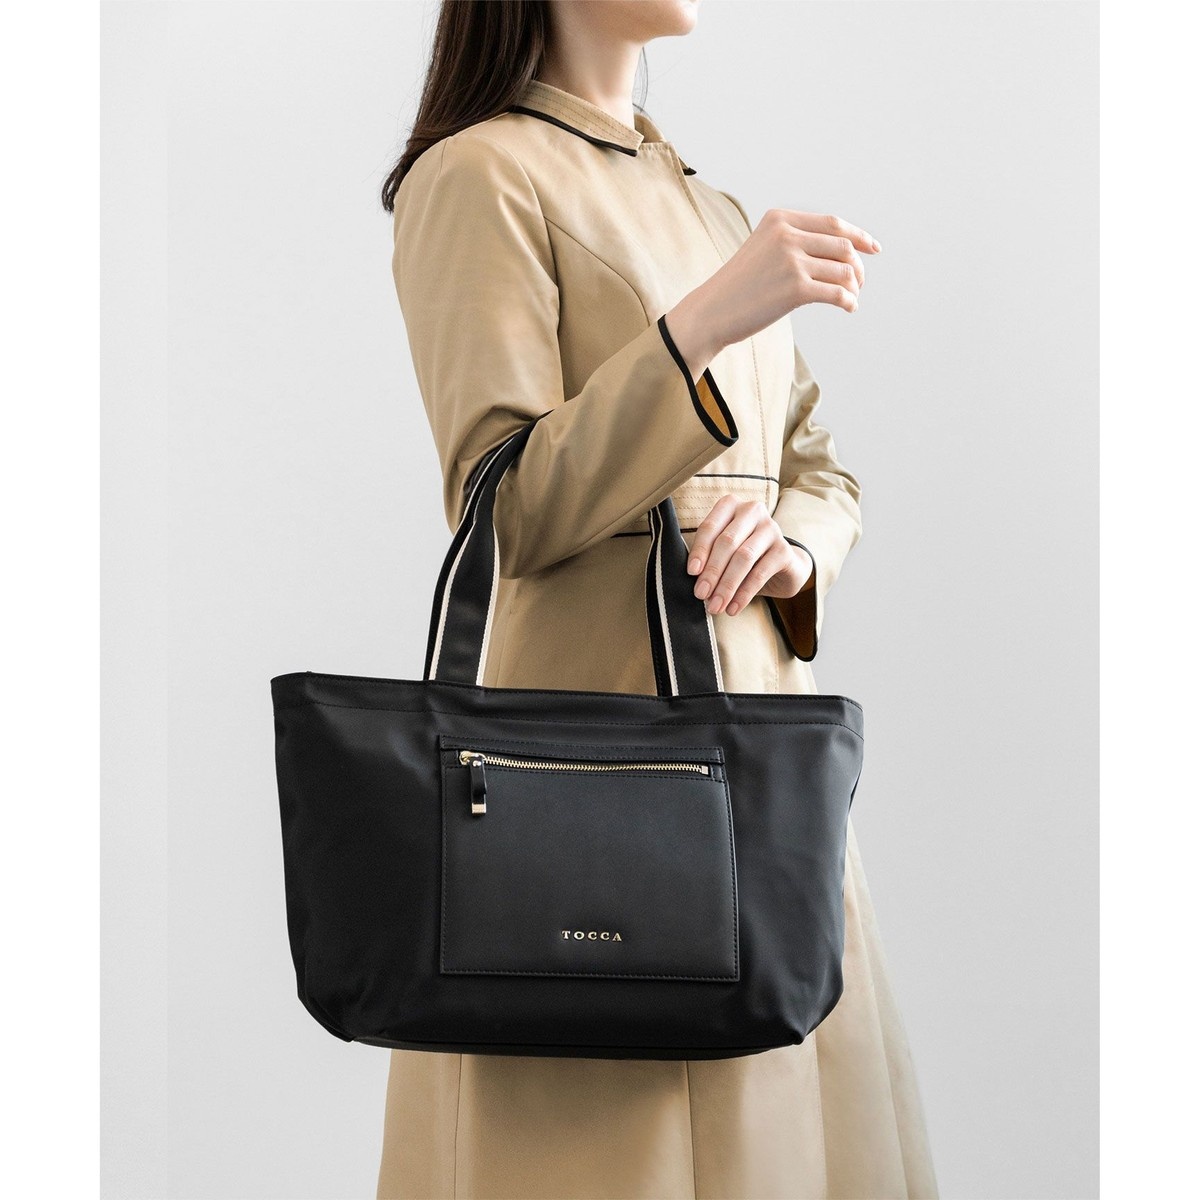 BICOLOR HANDLE DAILYTOTE トートバッグ   トッカTOCCA   BOT ...